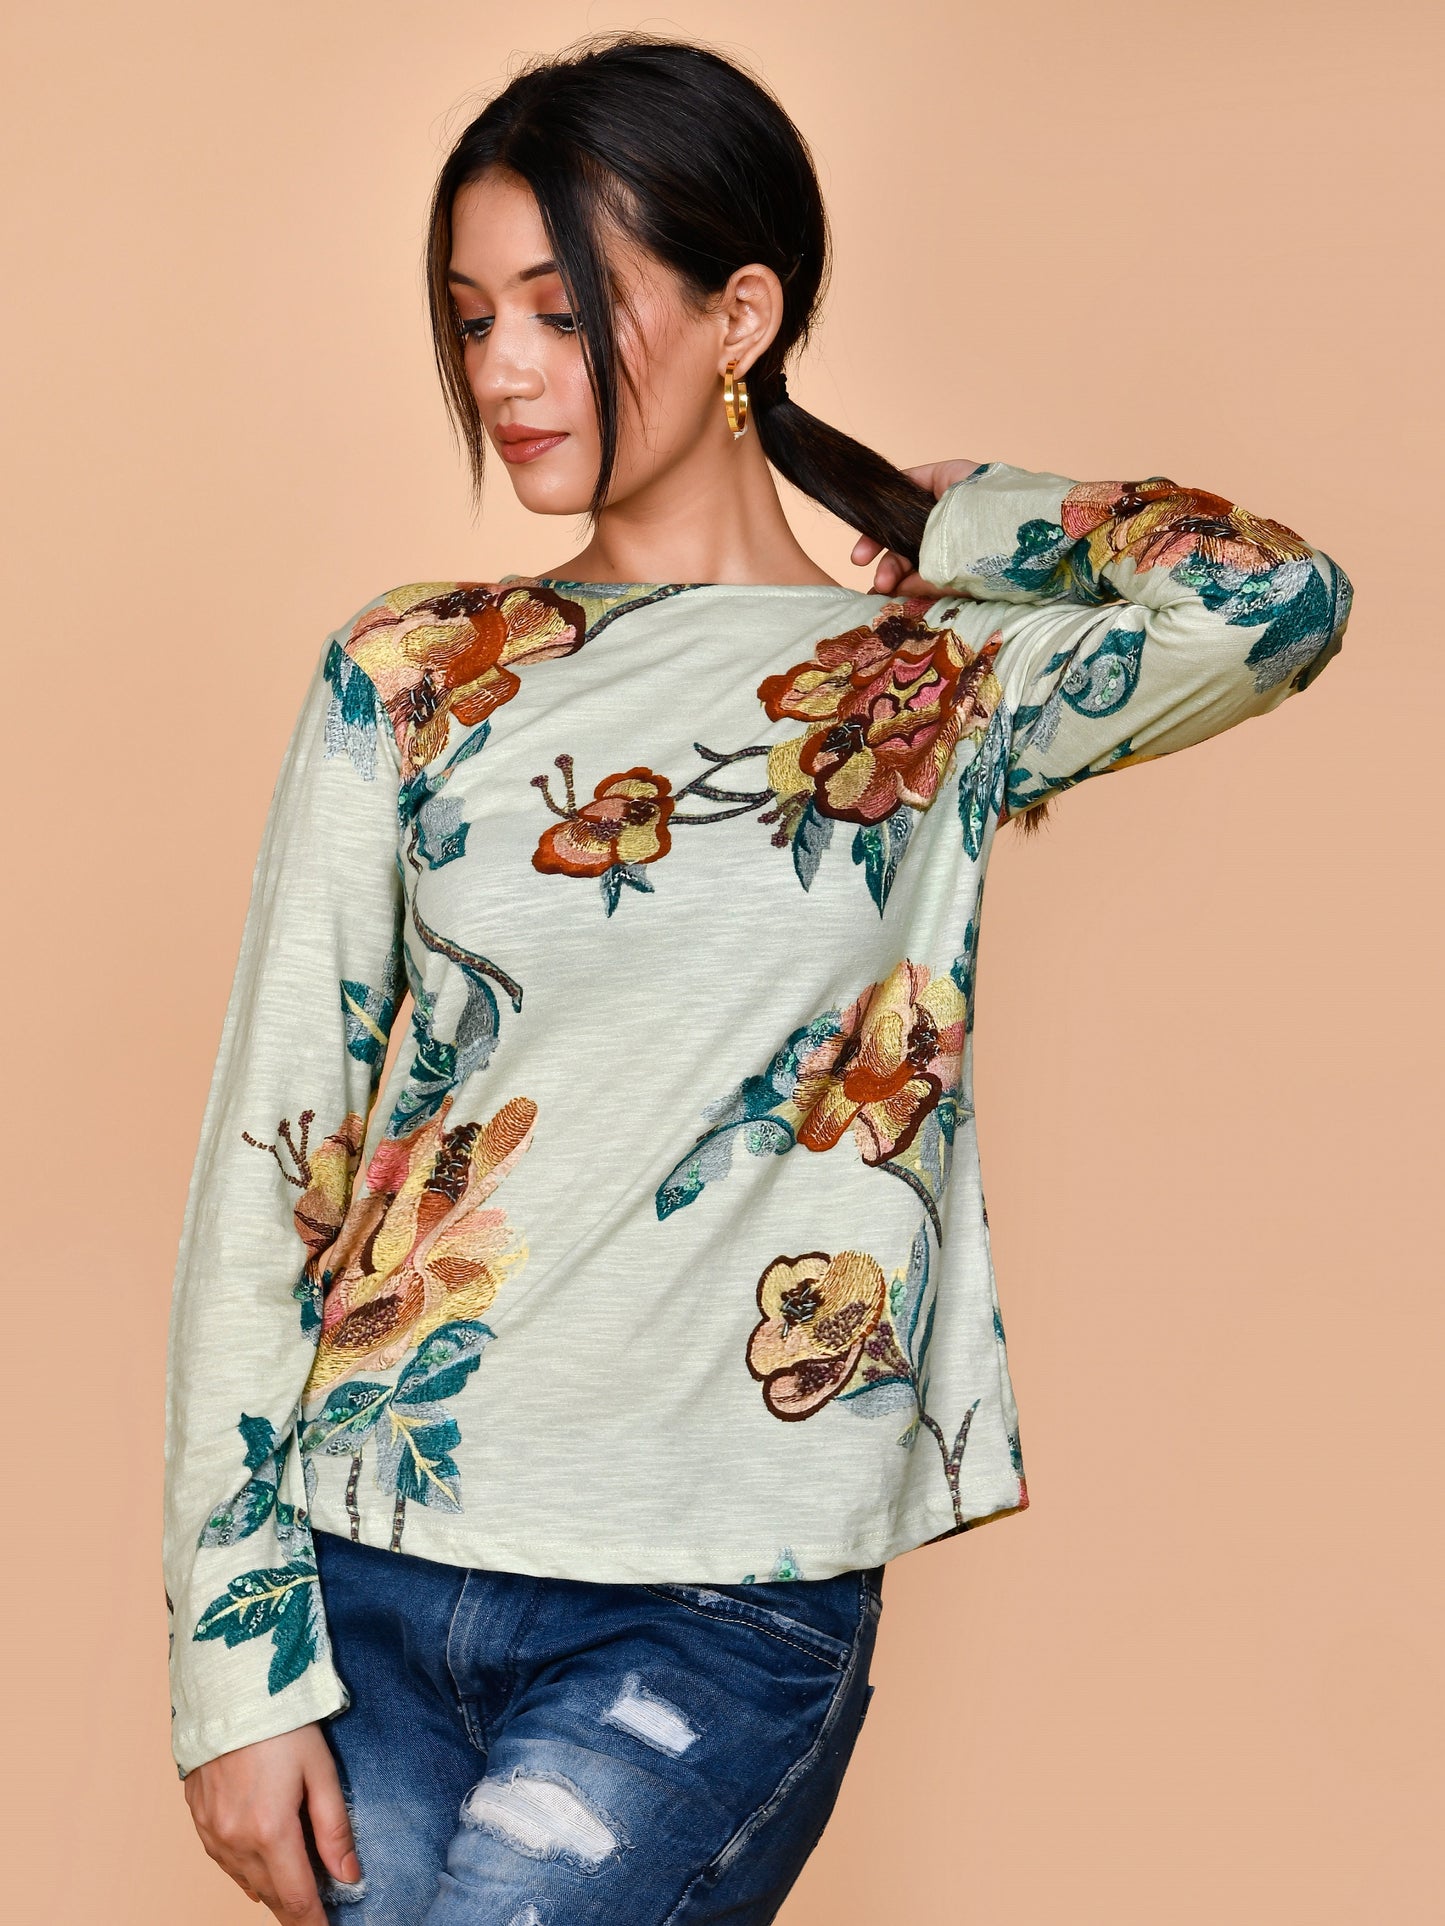 Expertly crafted from Khadi cotton, this full-sleeved top combines style and comfort for girls and women. Its regular fit and full sleeves make it perfect for any occasion. Made from high-quality materials, this top is not only durable but also environmentally friendly. Elevate your wardrobe with this timeless pie